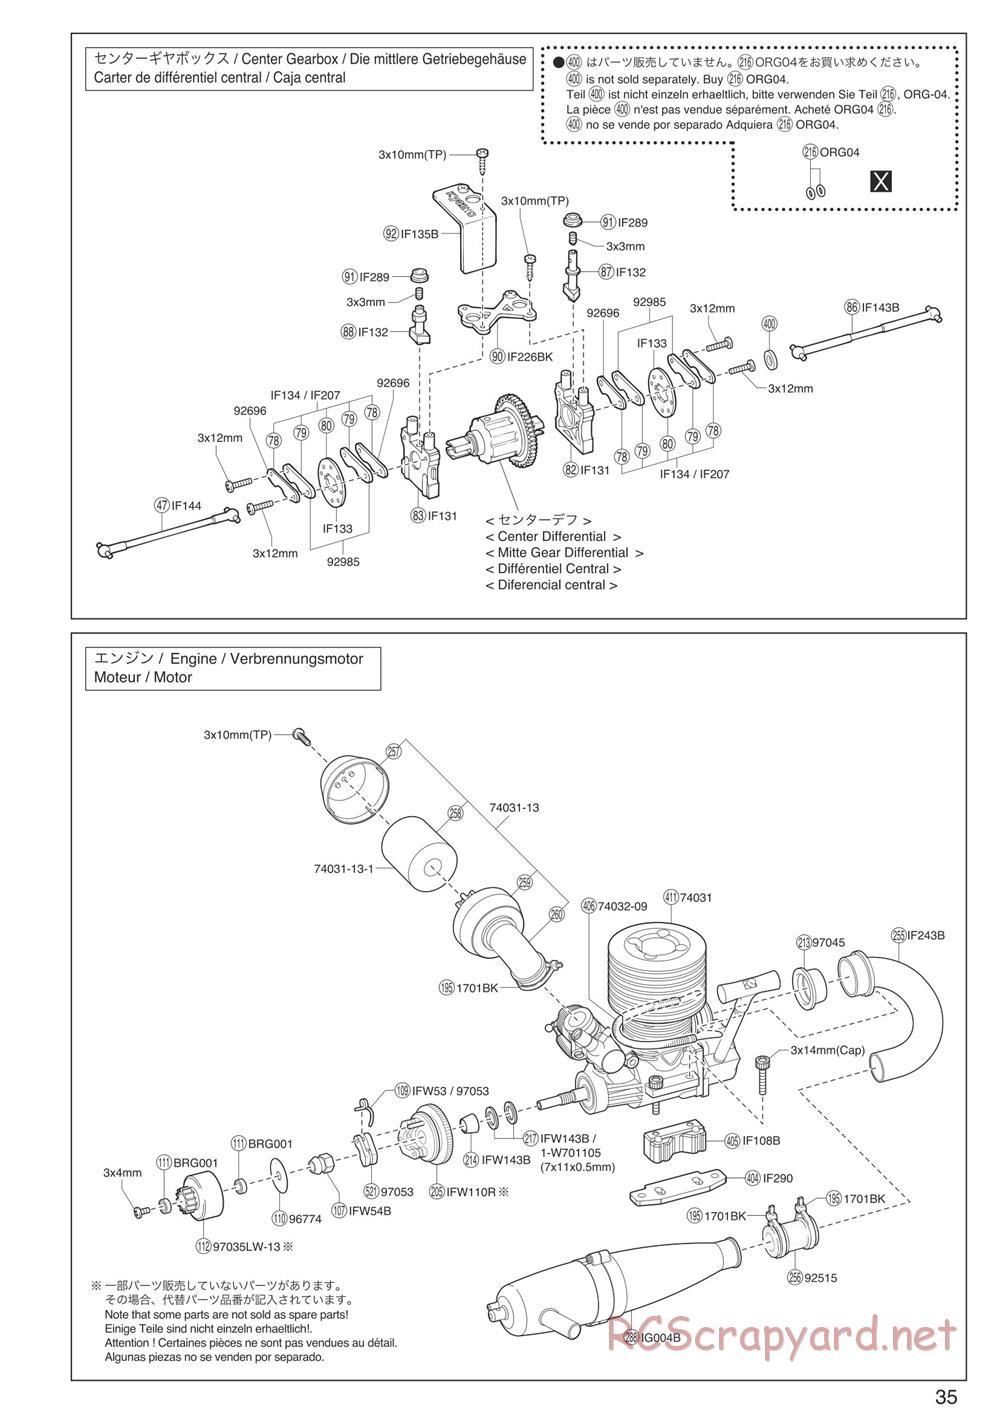 Kyosho - Inferno Neo 3.0 - Exploded Views - Page 4